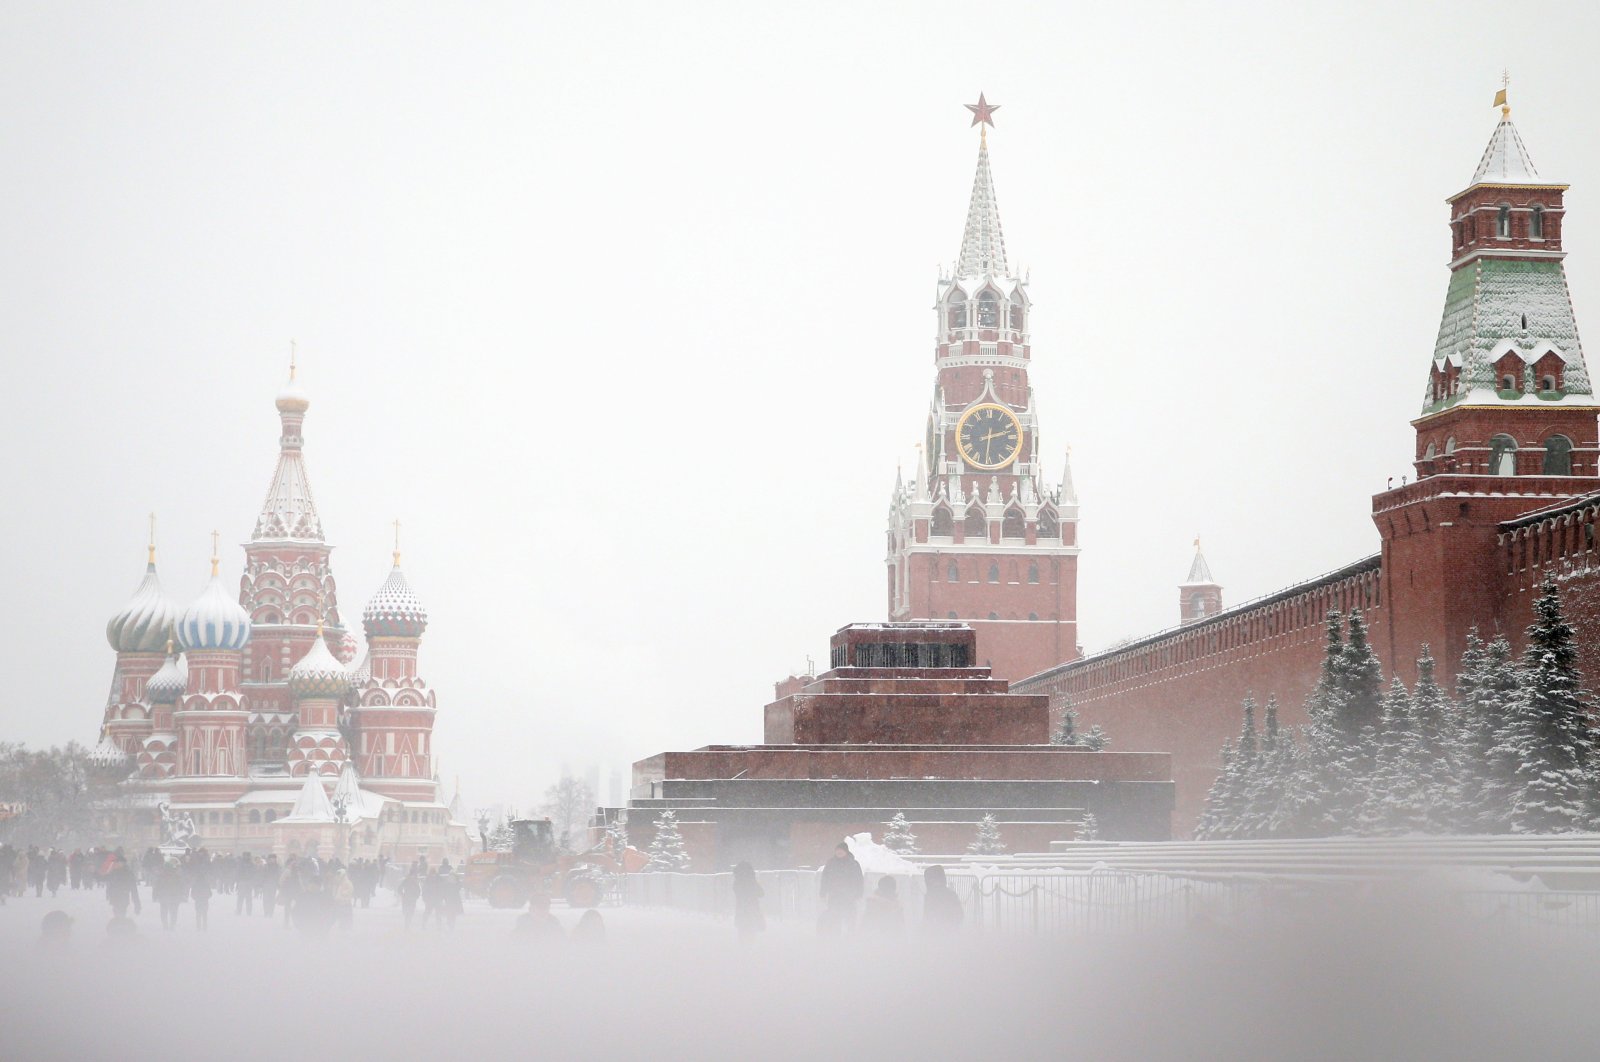 People walk on the Red Square in front of the Kremlin during snowfall in downtown Moscow, Russia, Dec. 28, 2022. (EPA Photo)